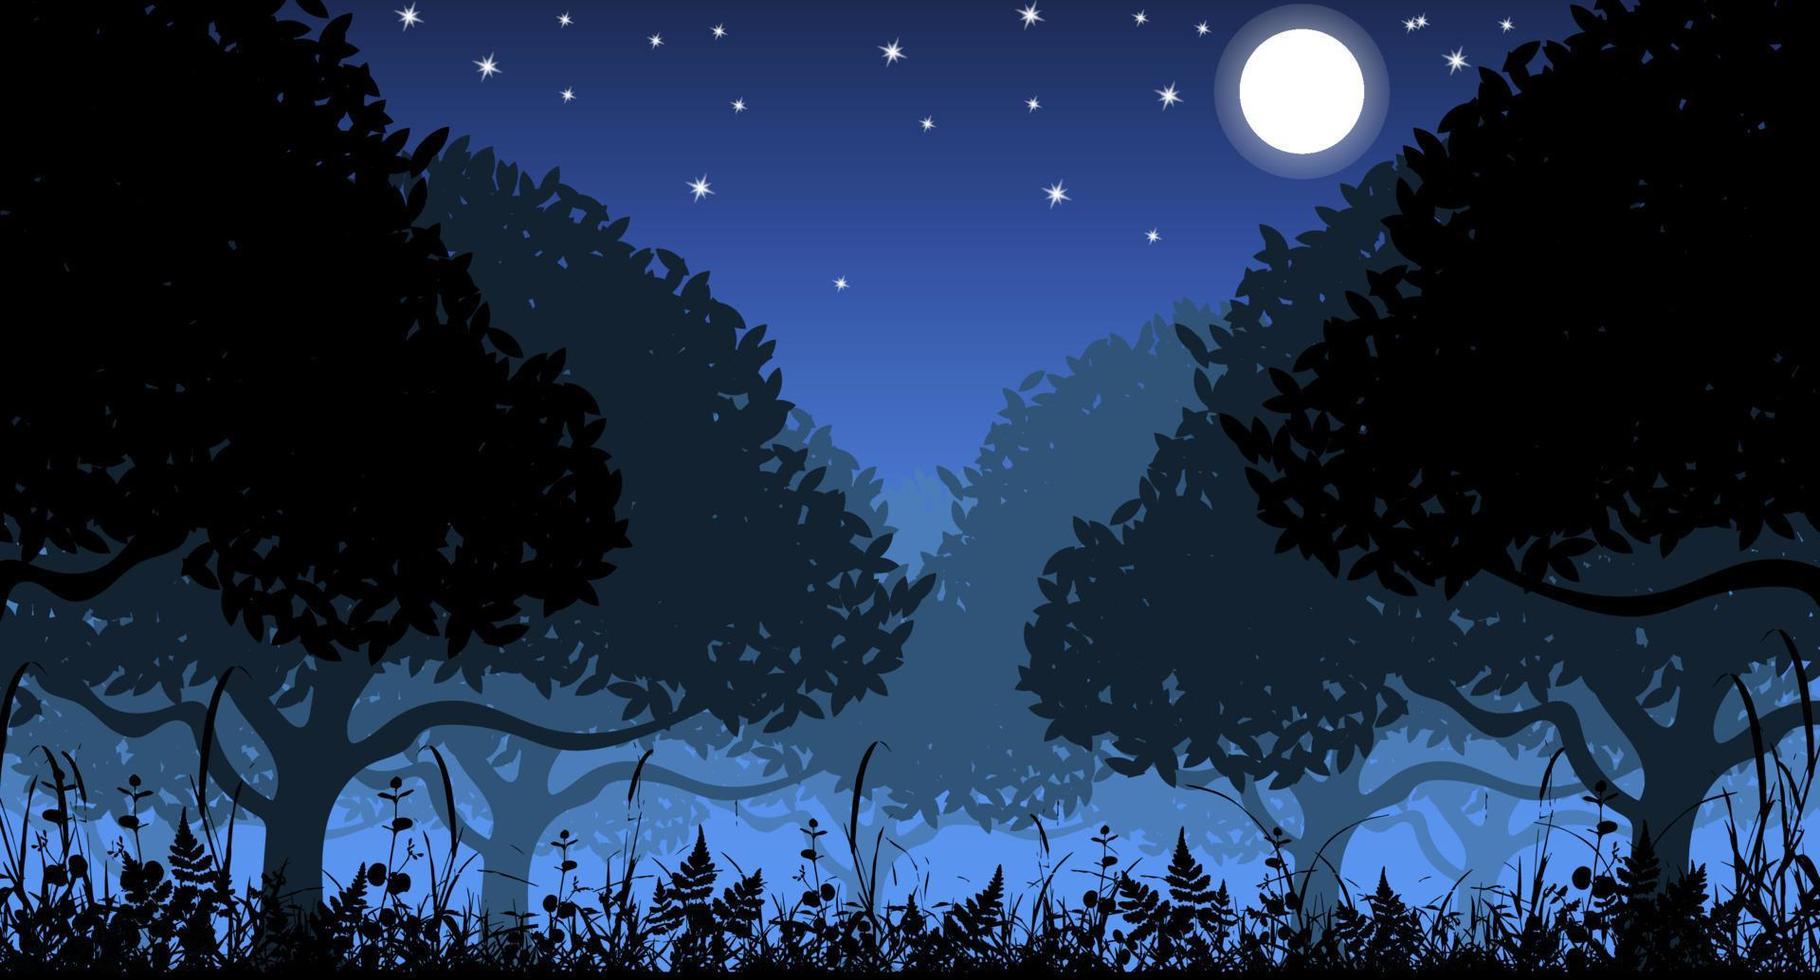 Night in the forest, beautiful landscape, with moon, forest silhouette vector